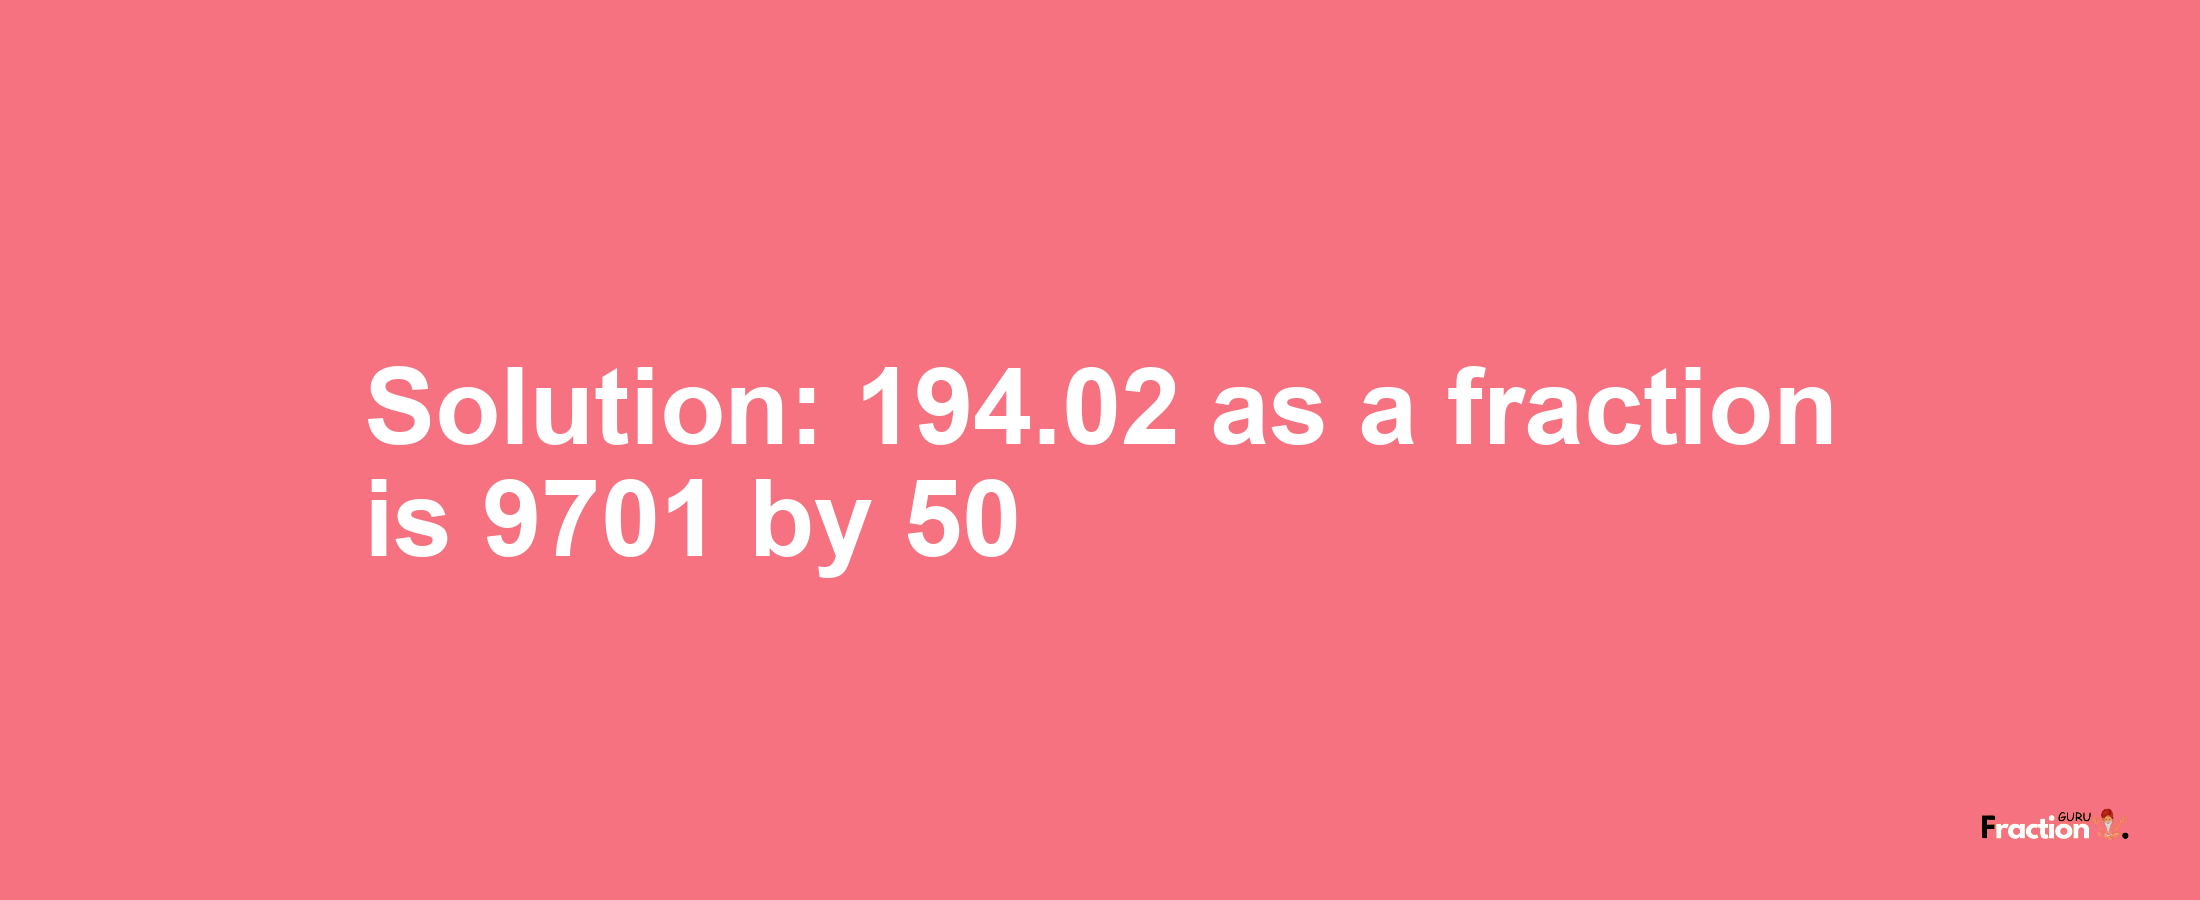 Solution:194.02 as a fraction is 9701/50